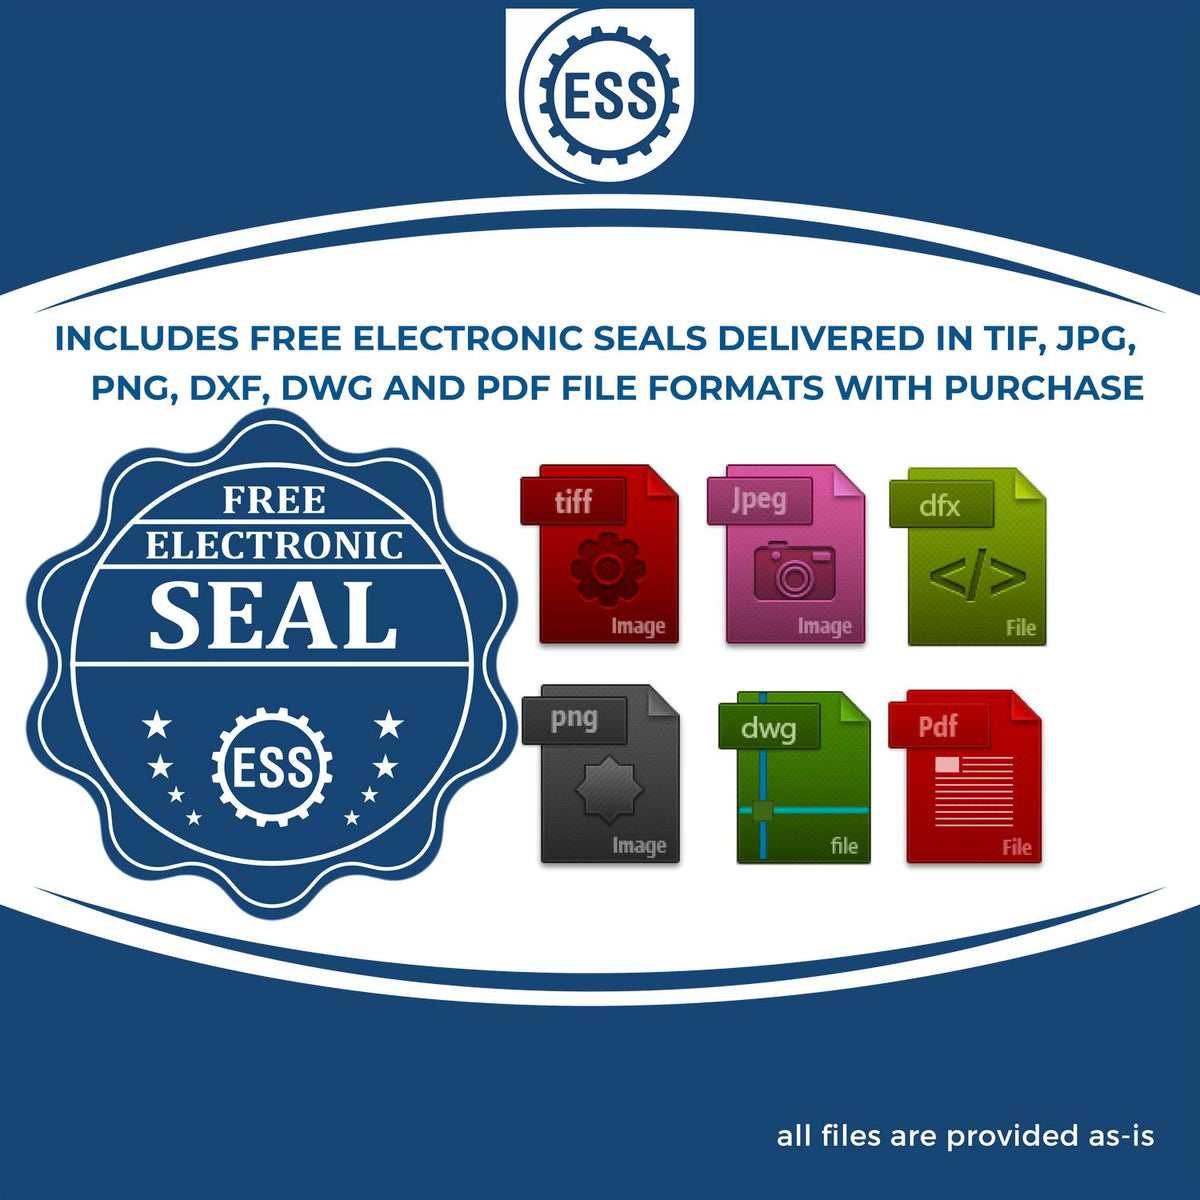 An infographic for the free electronic seal for the Slim Pre-Inked Alabama Professional Engineer Seal Stamp illustrating the different file type icons such as DXF, DWG, TIF, JPG and PNG.